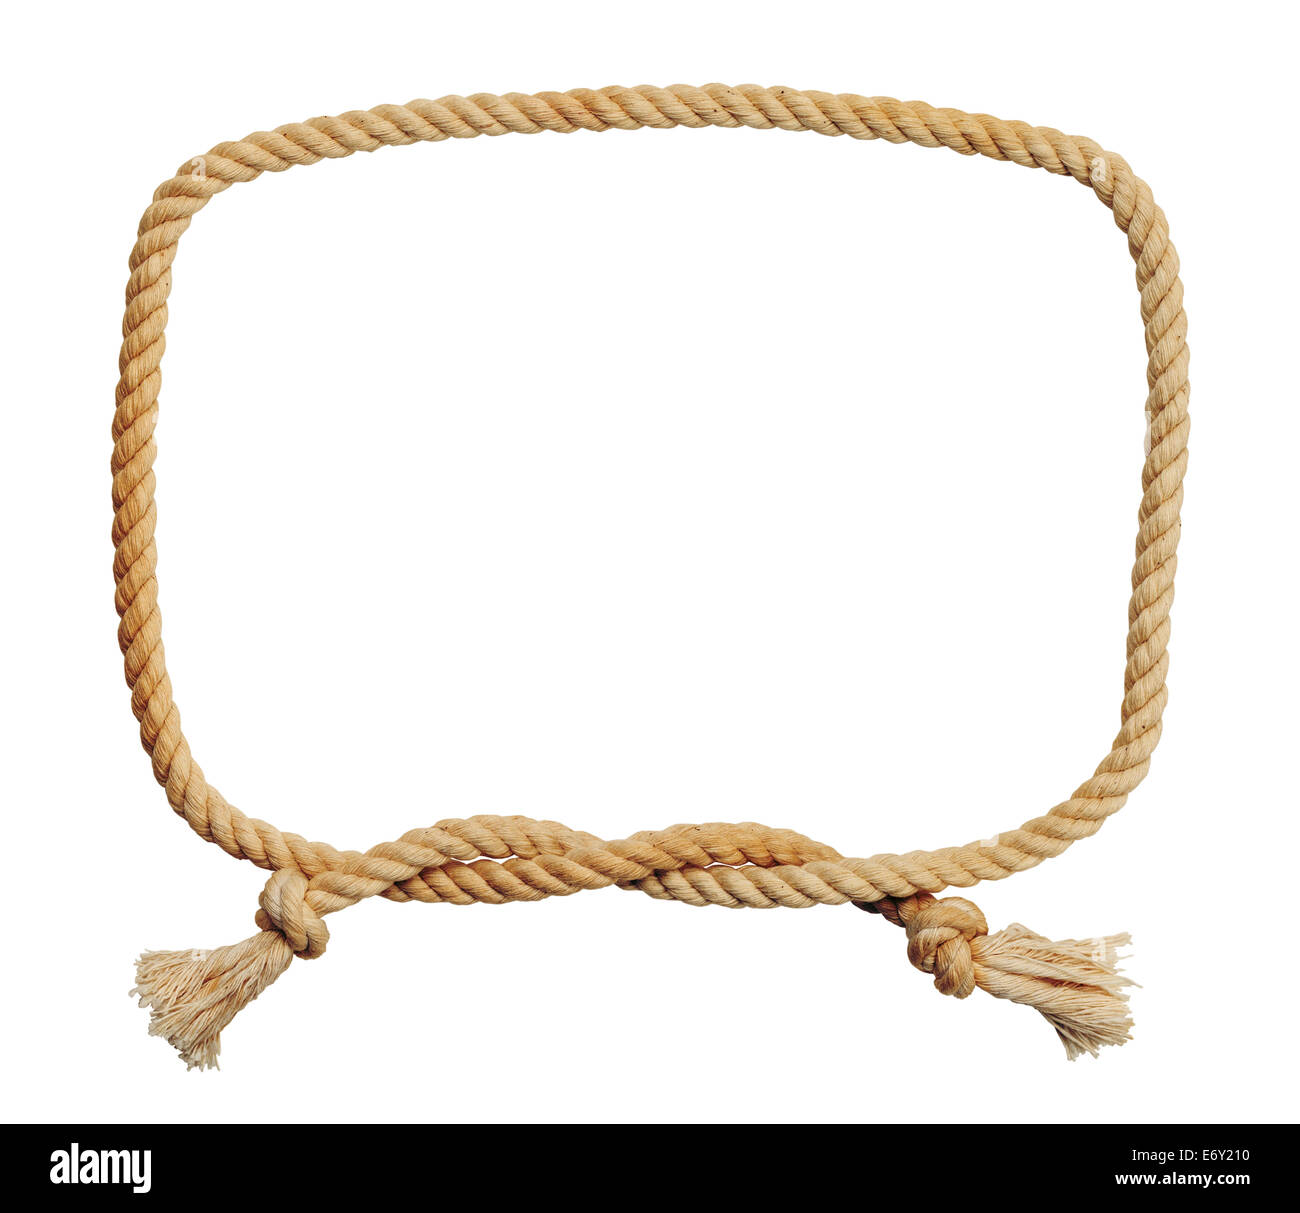 Alte dreckige Rope Square Knot Frame, Isolated on White Background. Stockfoto